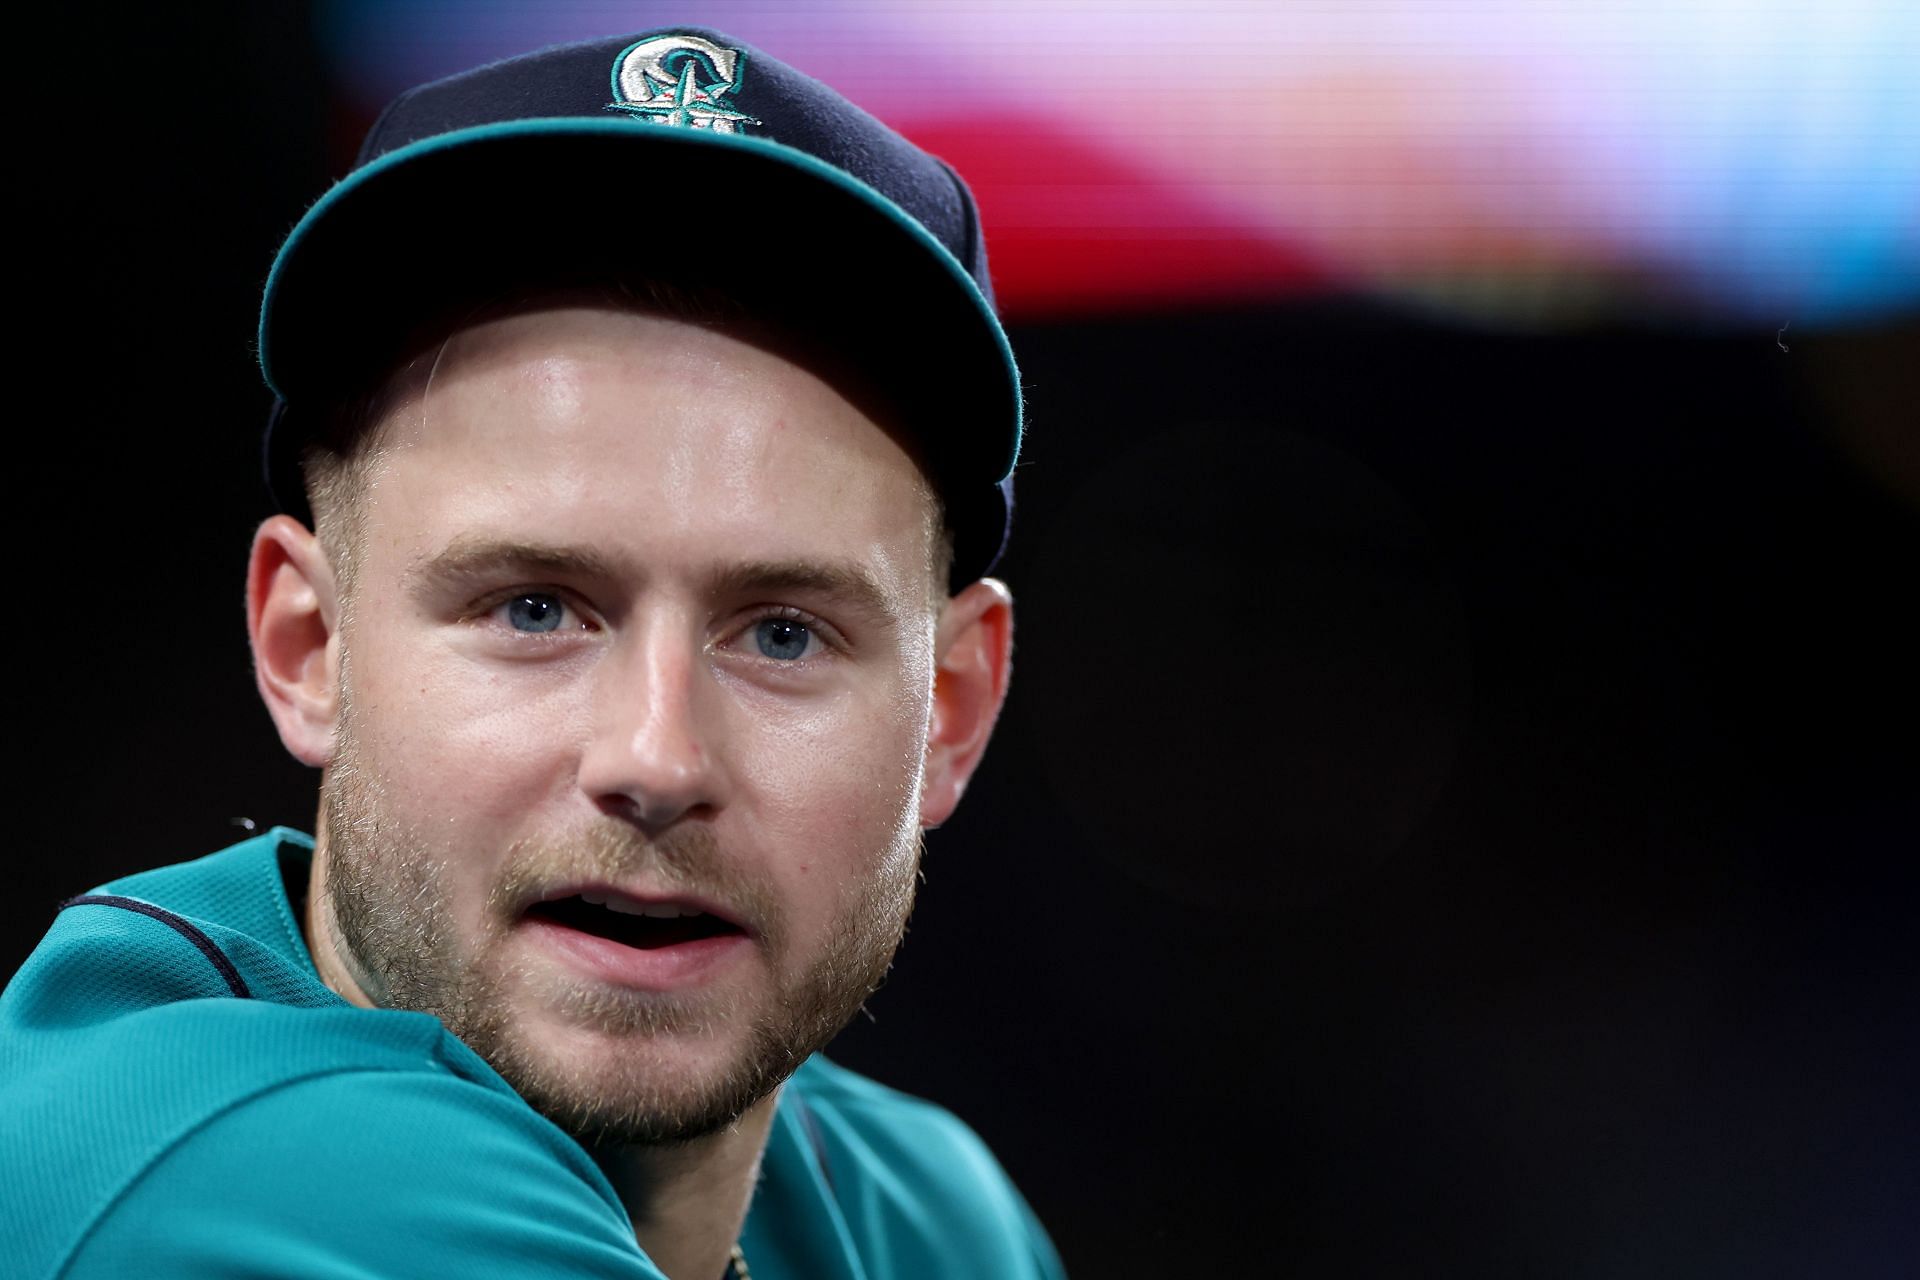 Seattle Mariners outfielder, Wisconsin native Jarred Kelenic in photos